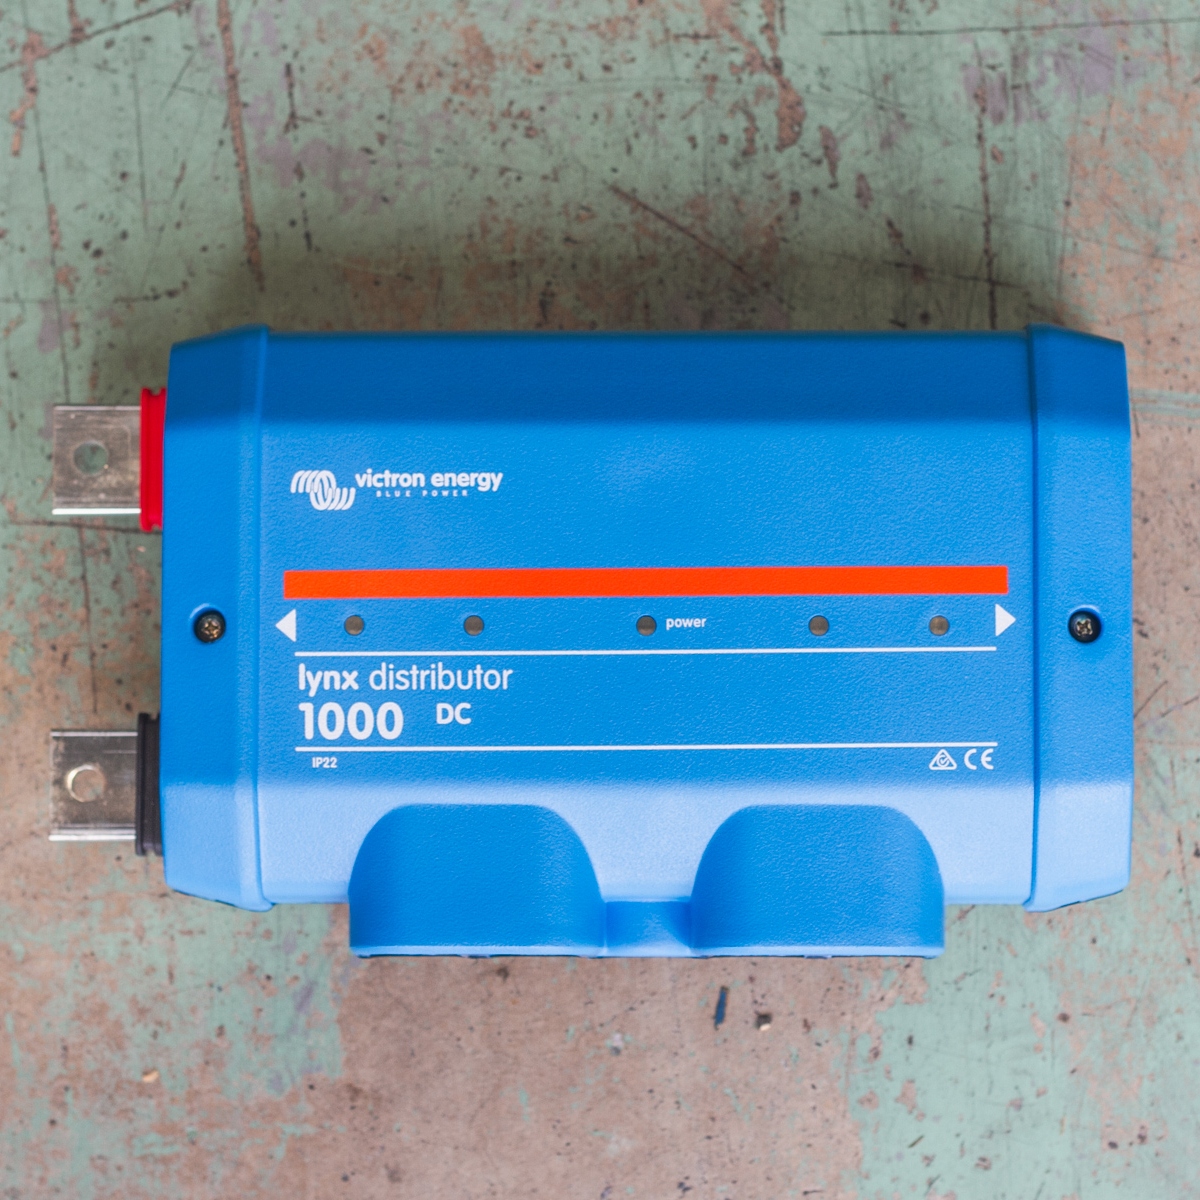 A blue "Victron Energy" Lynx Distributor 1000 DC device with red and black terminals, featuring the Victron Lynx Distributor 1000A Busbar, rests on a worn green surface.